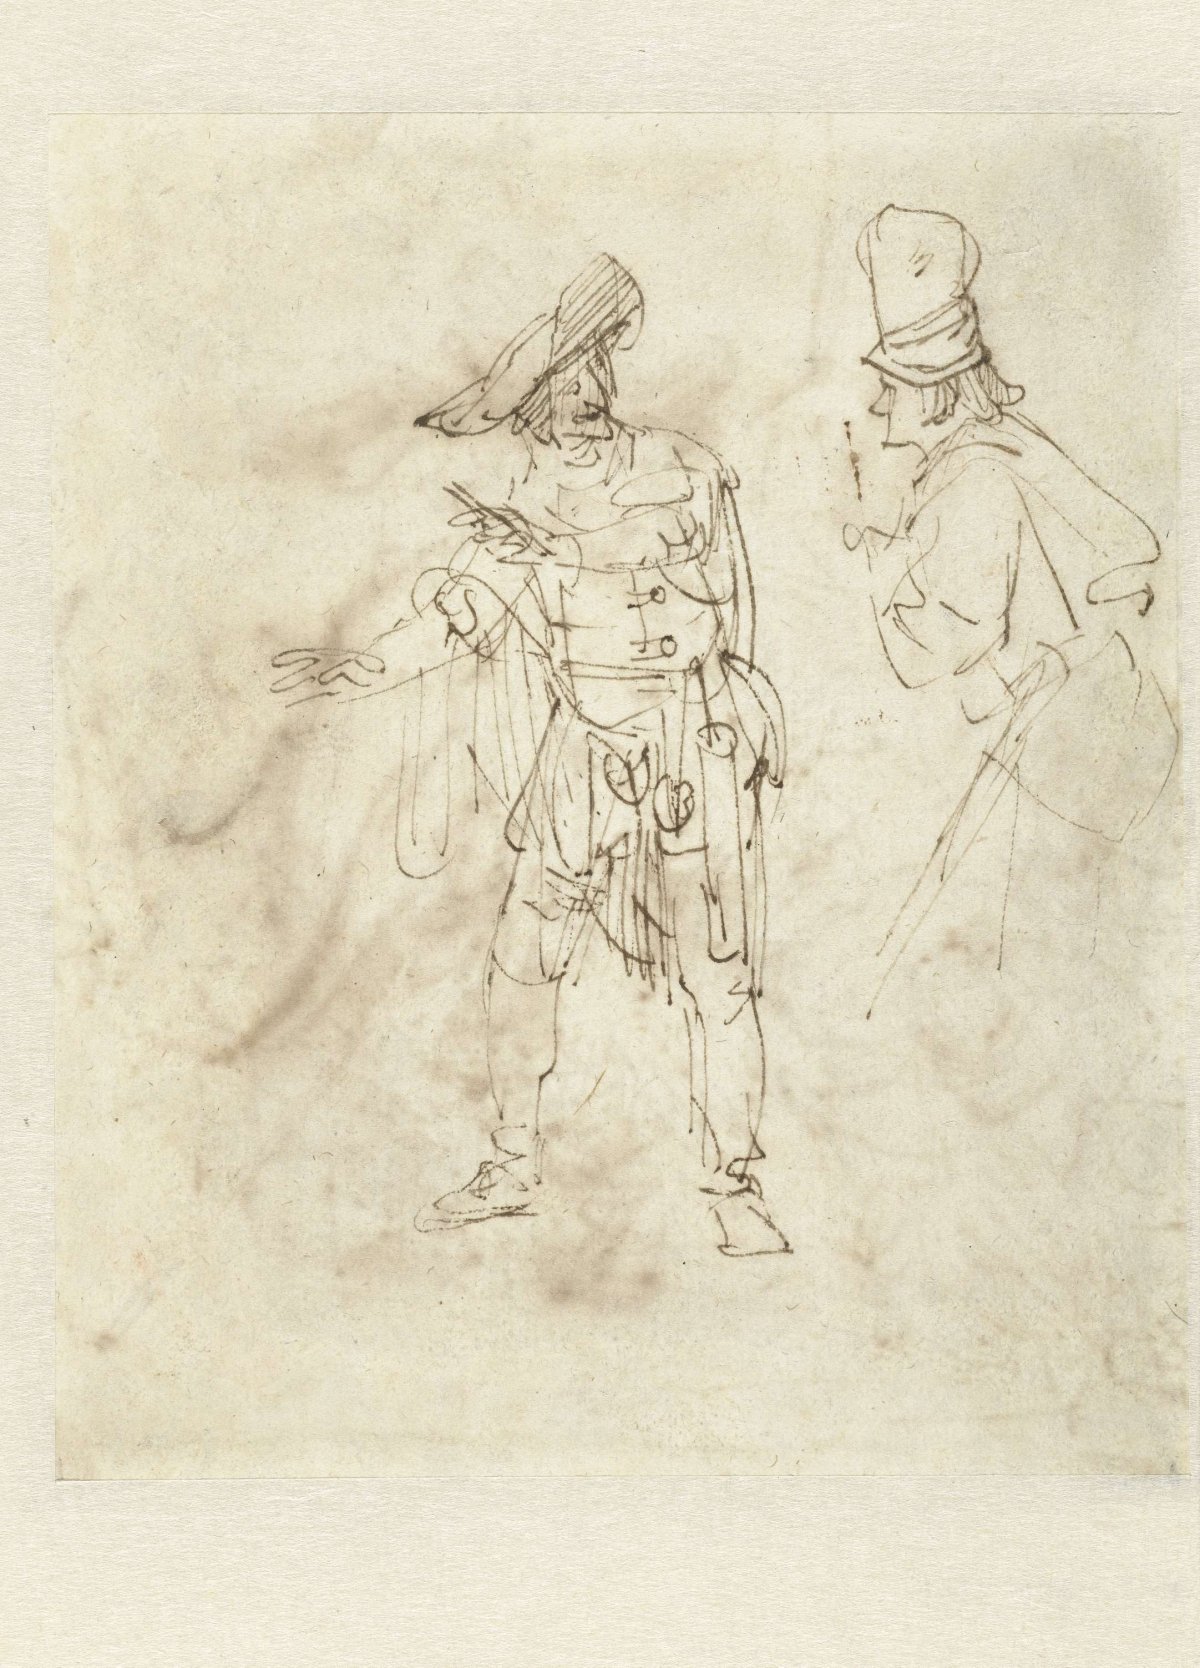 Actor in the Role of Pantalone Engaged in Conservation, Rembrandt van Rijn, c. 1634 - c. 1636